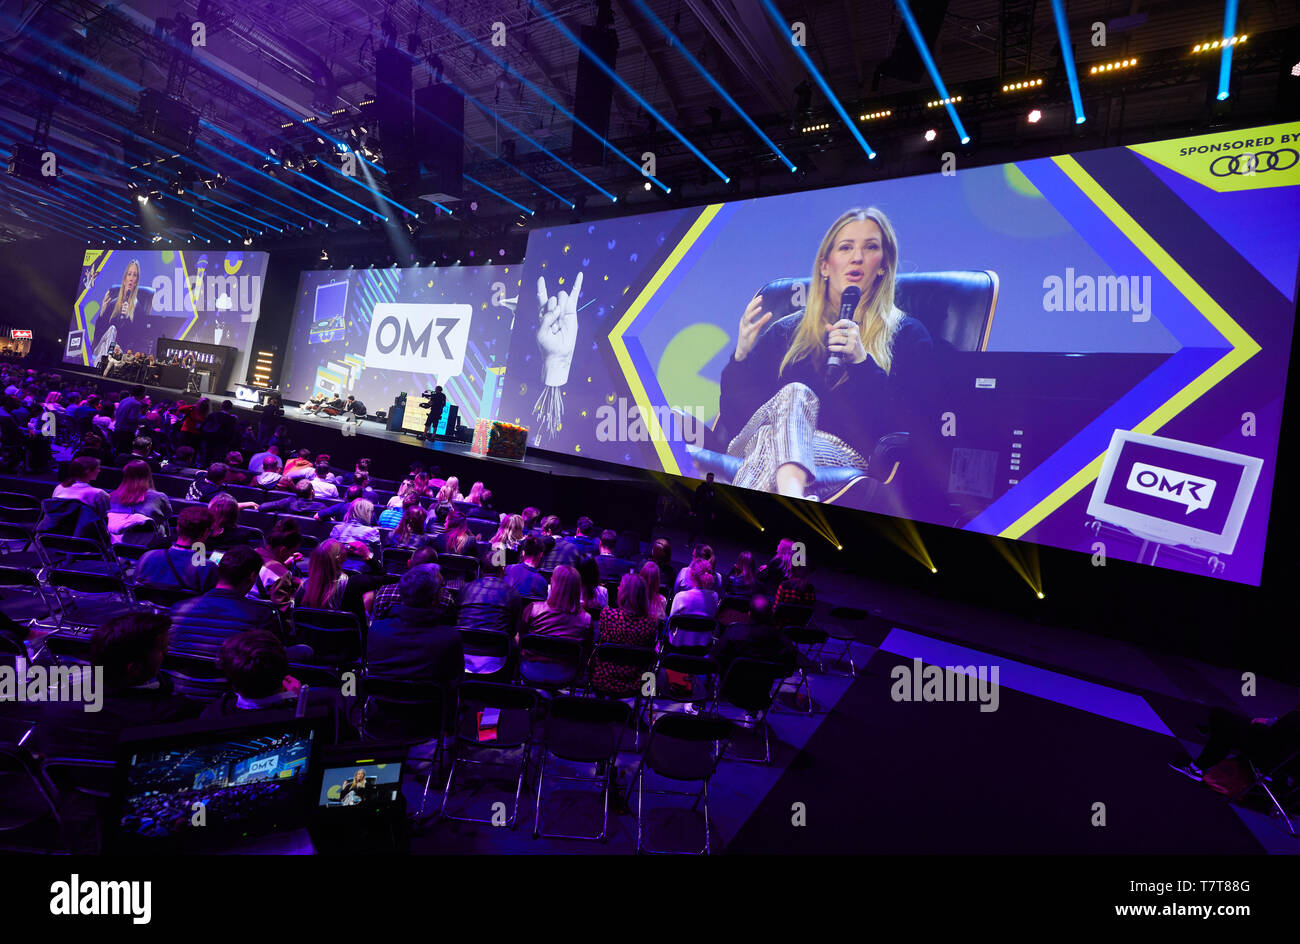 Hamburg, Germany. 08th May, 2019. Ellie Goulding, British singer-songwriter, and Philipp Westermeyer, co-founder of OMR, speak on a stage at the marketing trade fair 'Online Marketing Rockstars' (OMR) in the exhibition halls. Credit: Georg Wendt/dpa/Alamy Live News Stock Photo